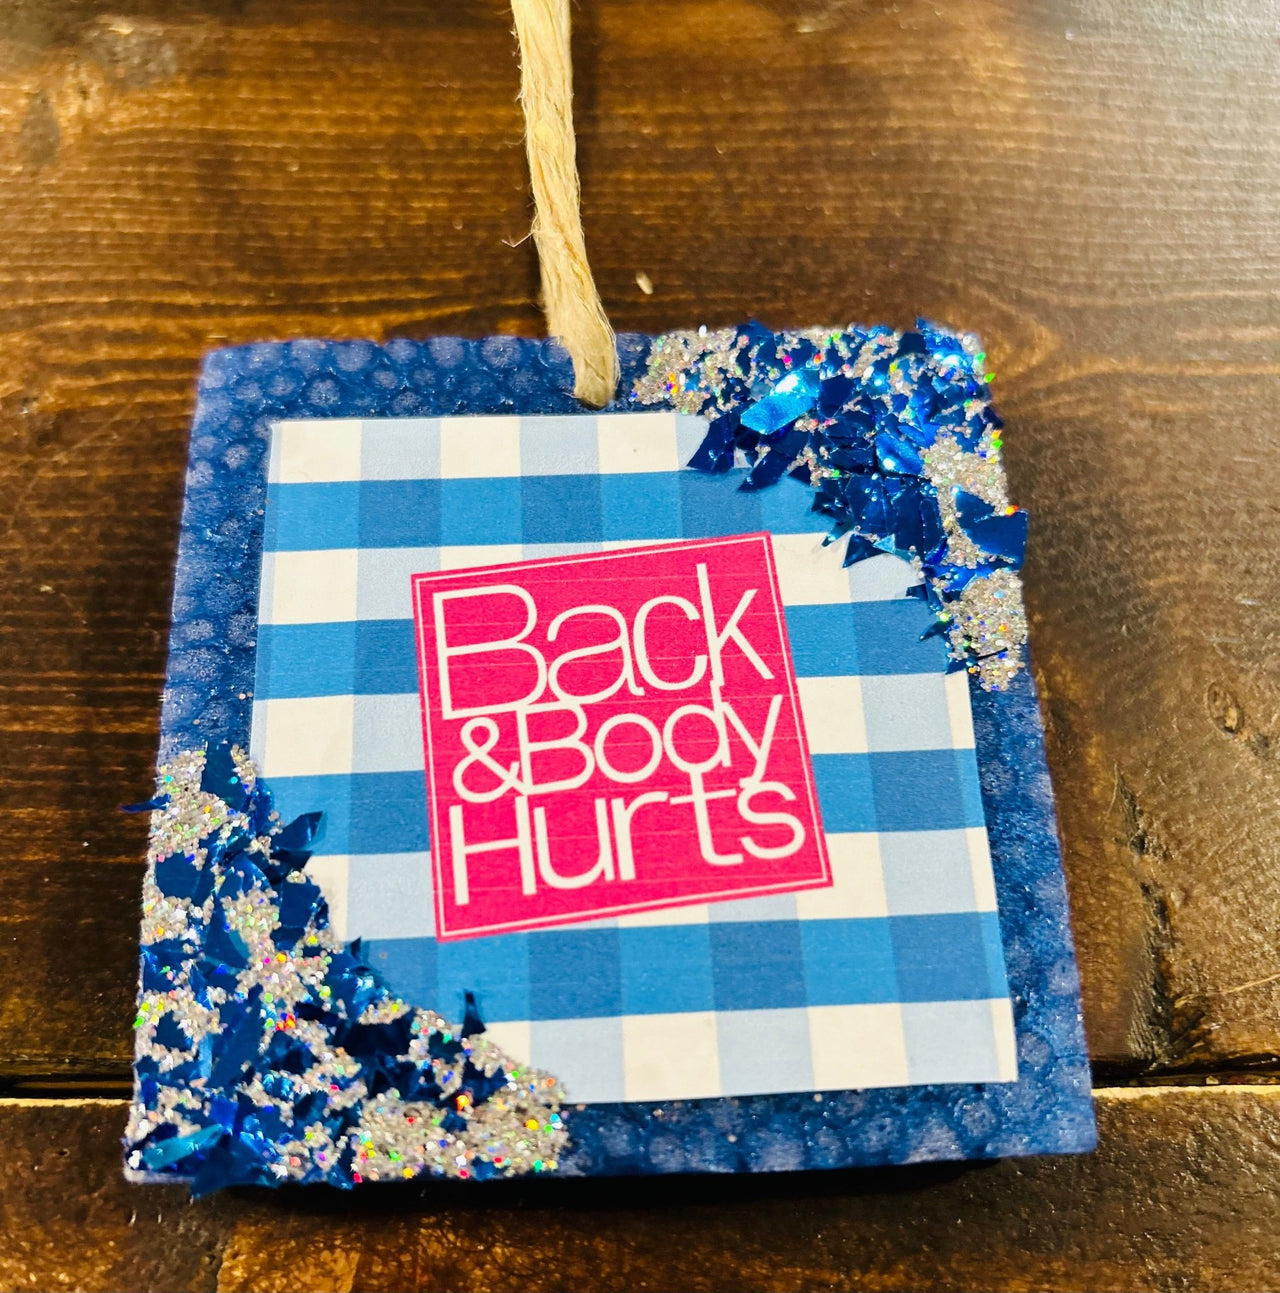 Back And Body Hurts Car Freshie (Black Ice) - Hey Heifer Boutique